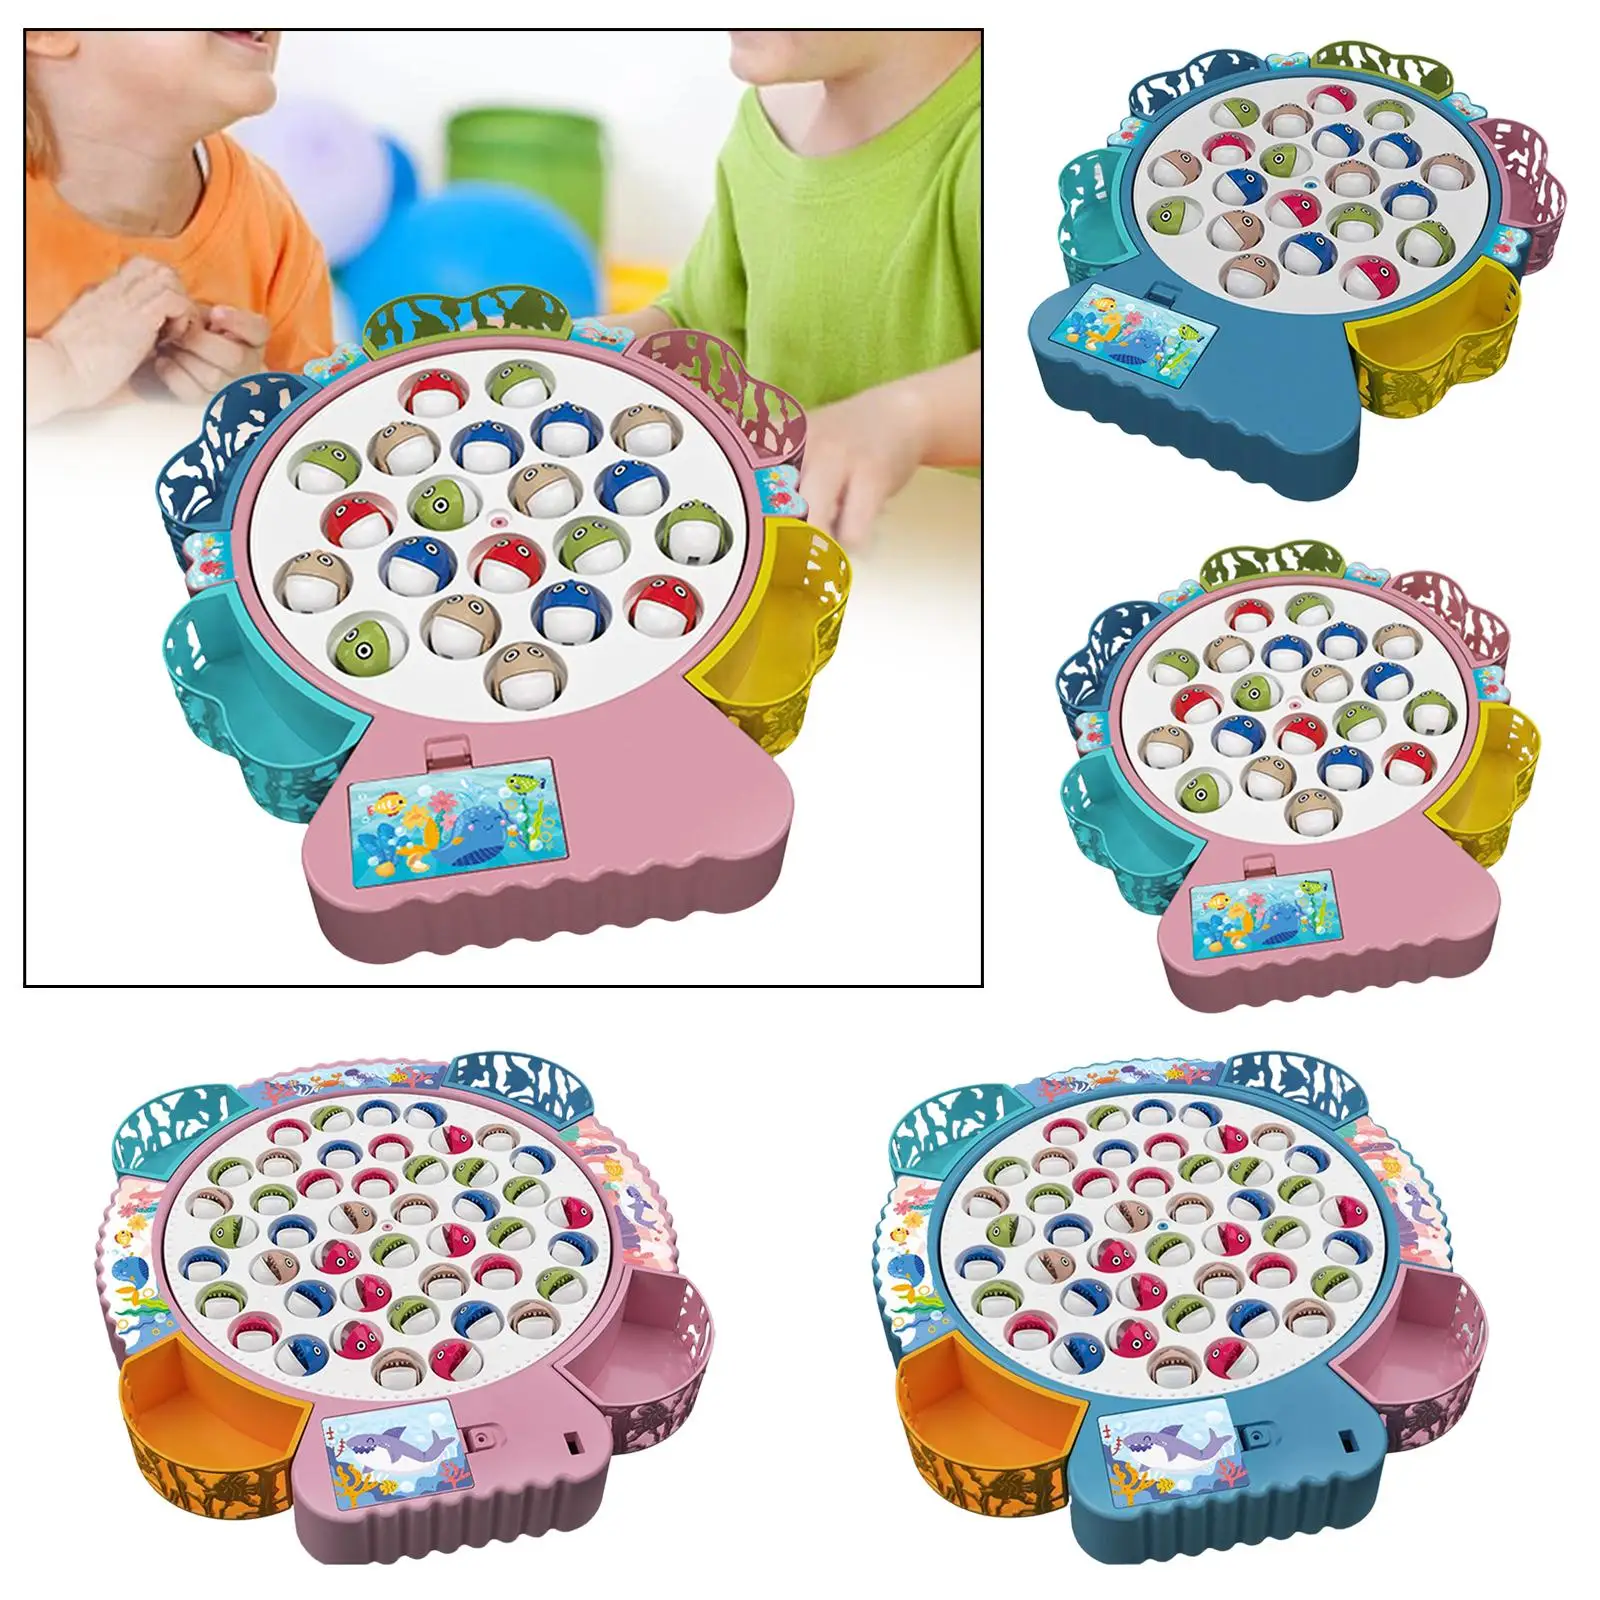 Rotating Fishing Game Educational Colorful Fine Motor Skills Role Play for Toddlers Kid Family Preschool Age 3 and up